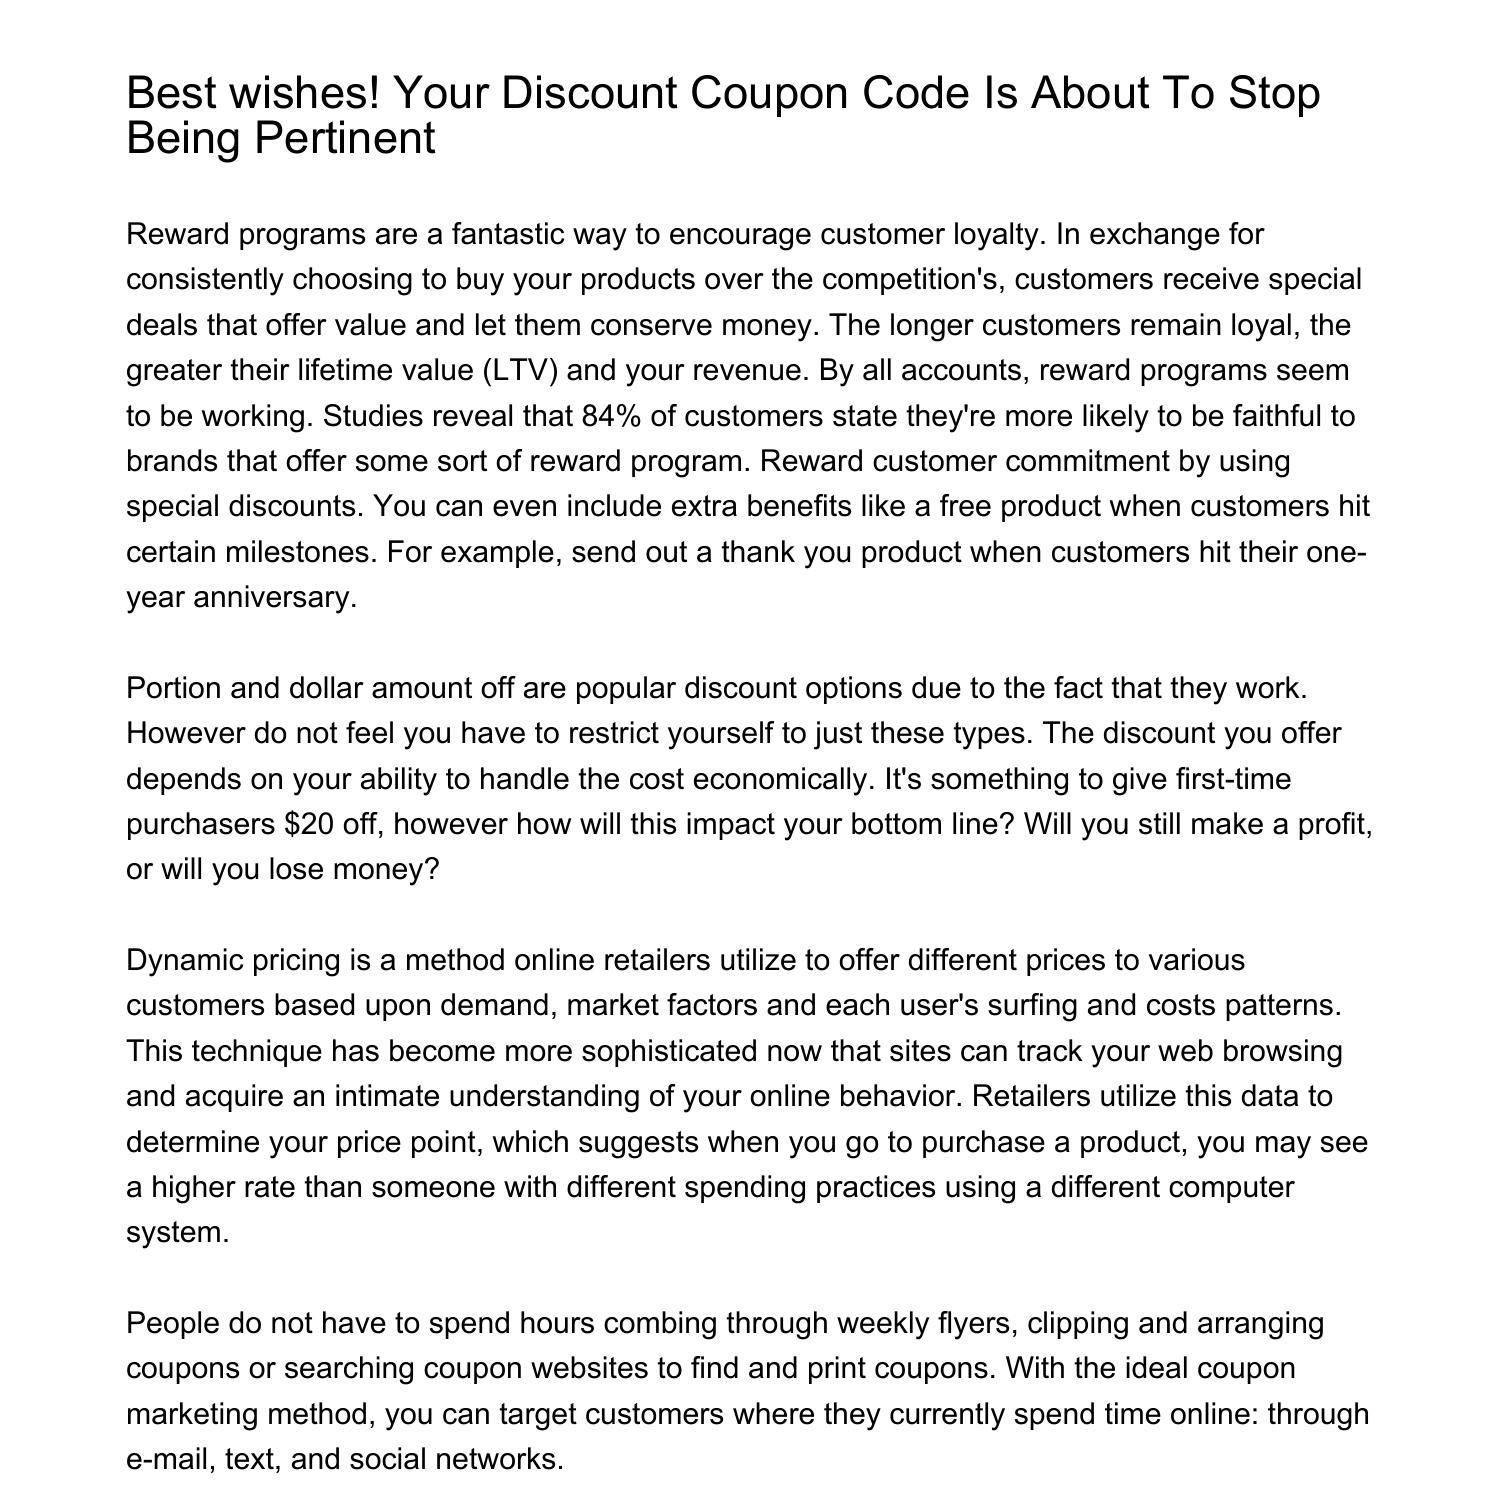 best-wishes-your-discount-coupon-code-is-about-to-stop-being